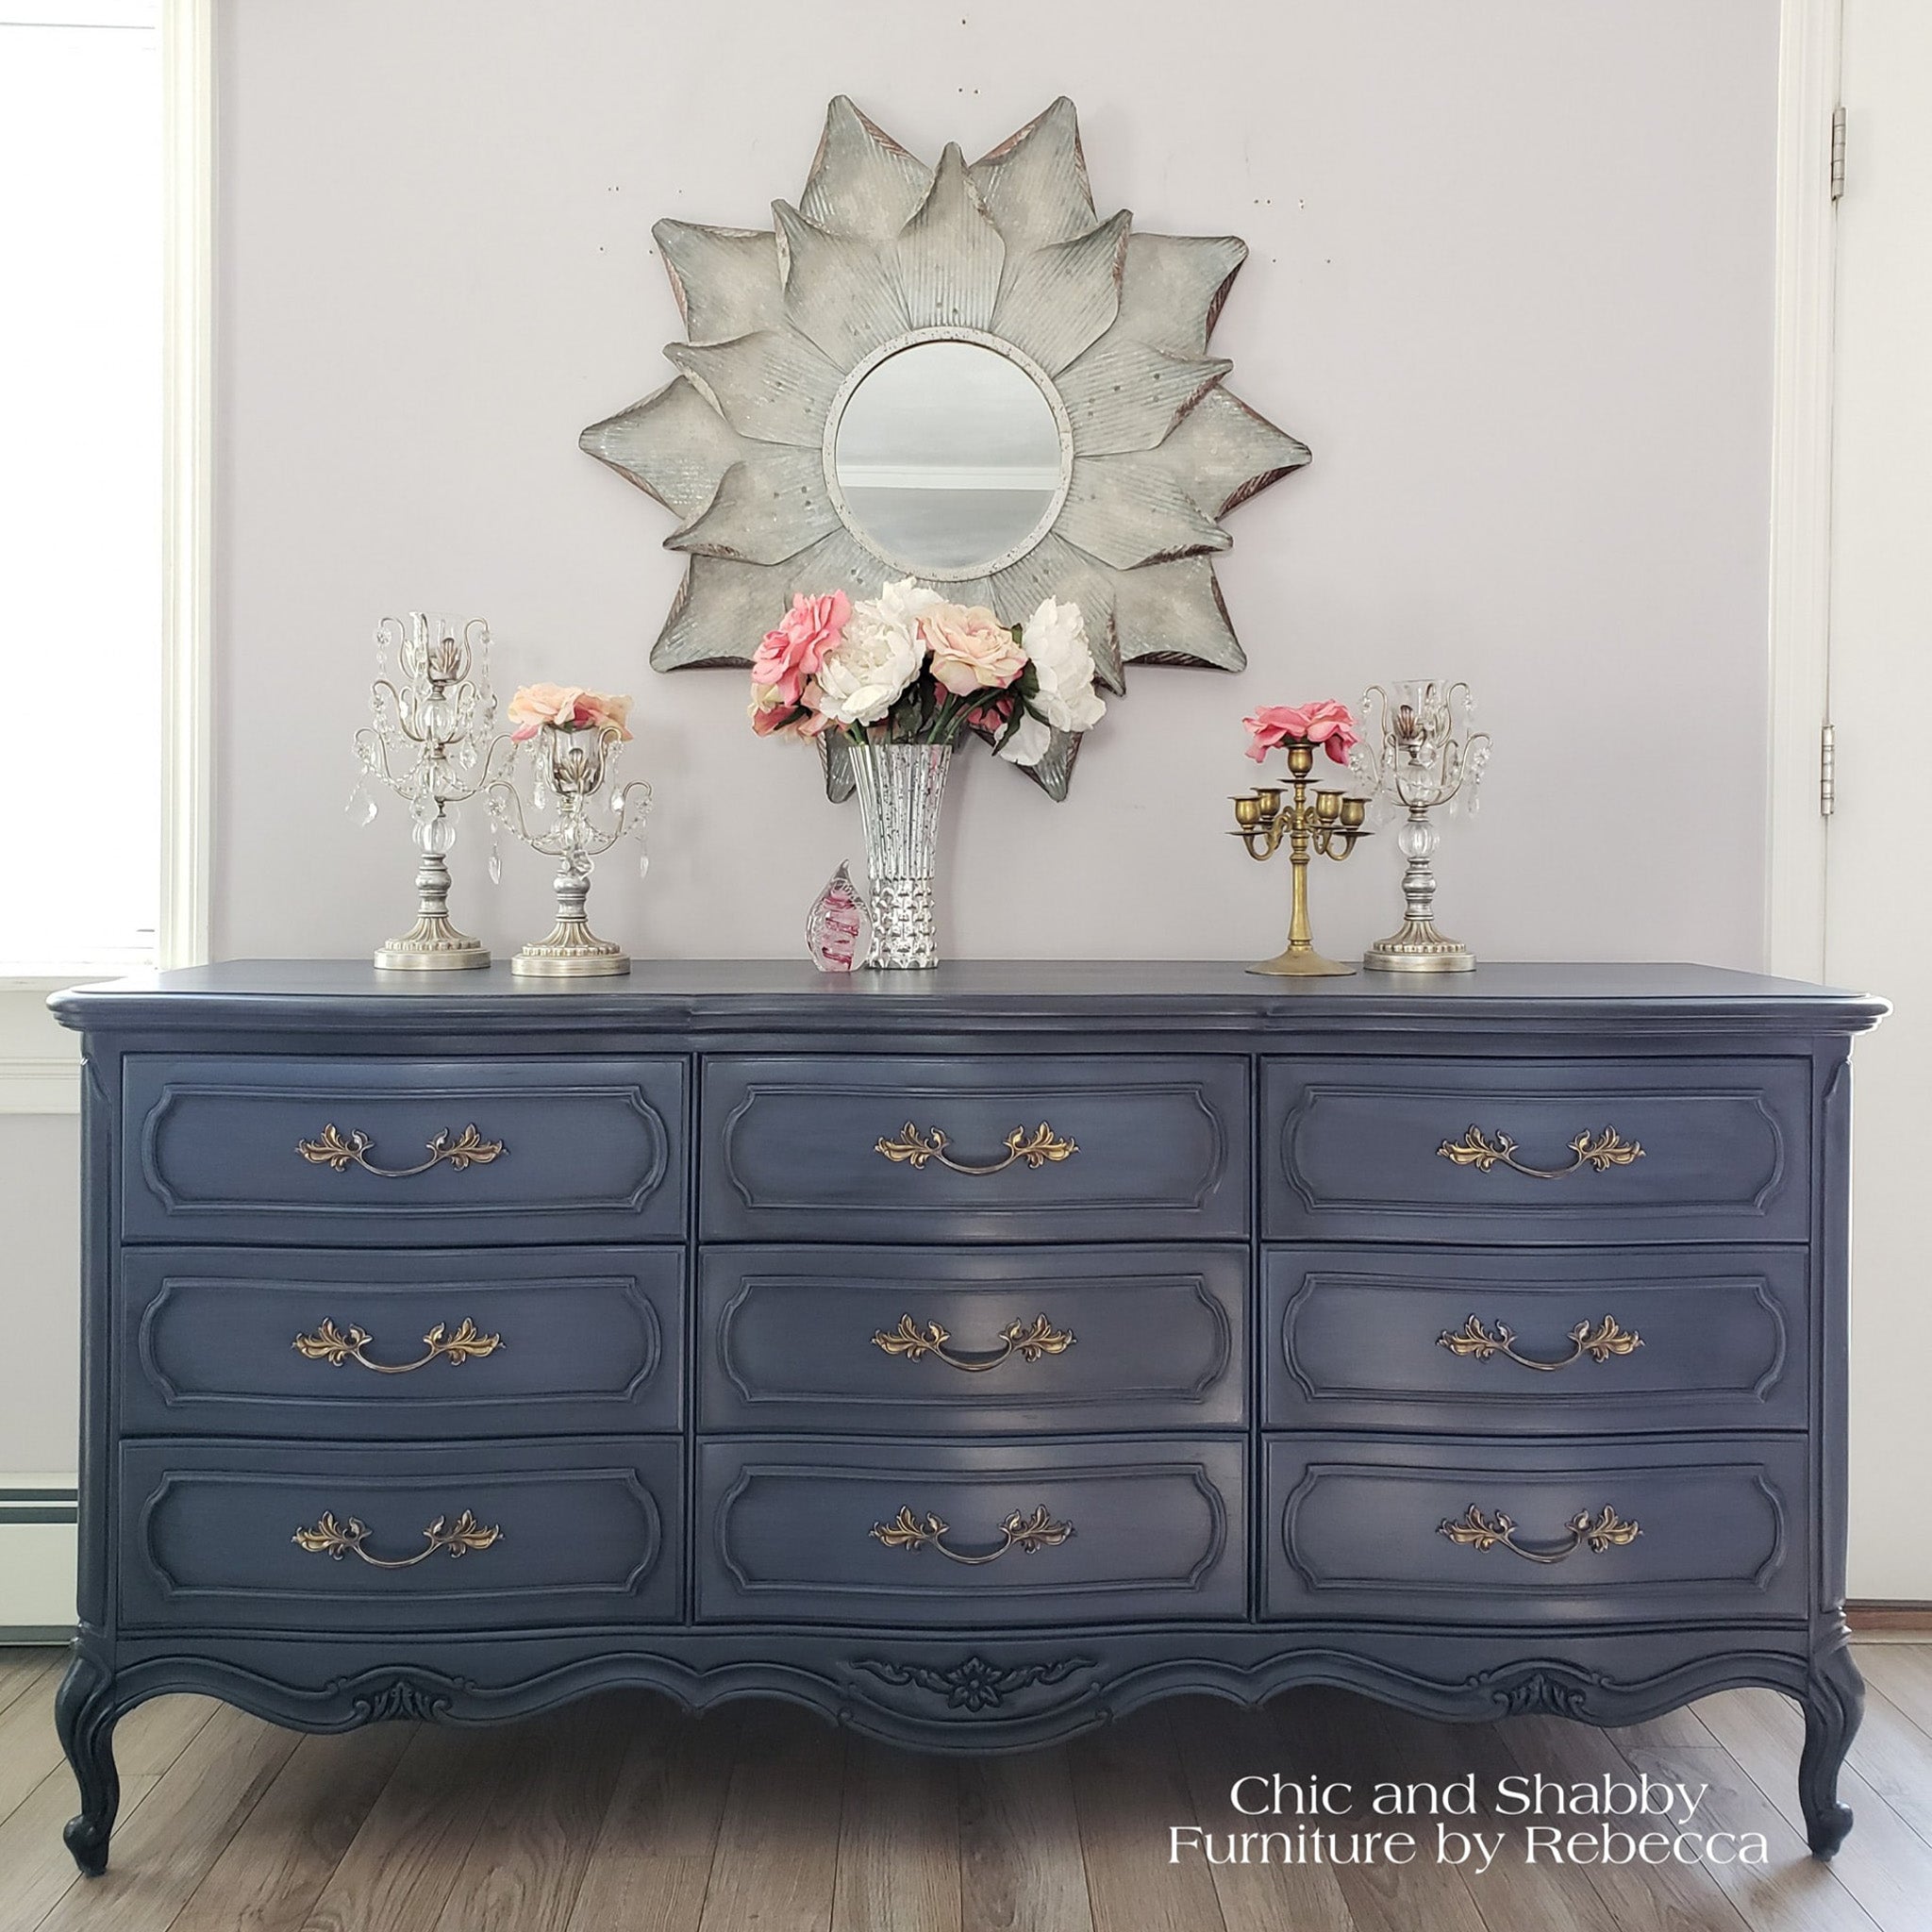 A vintage 9-drawer dresser refurbished by Chic and Shabby Furniture by Rebecca is painted in Dixie Belle's Yankee Blue chalk mineral paint.